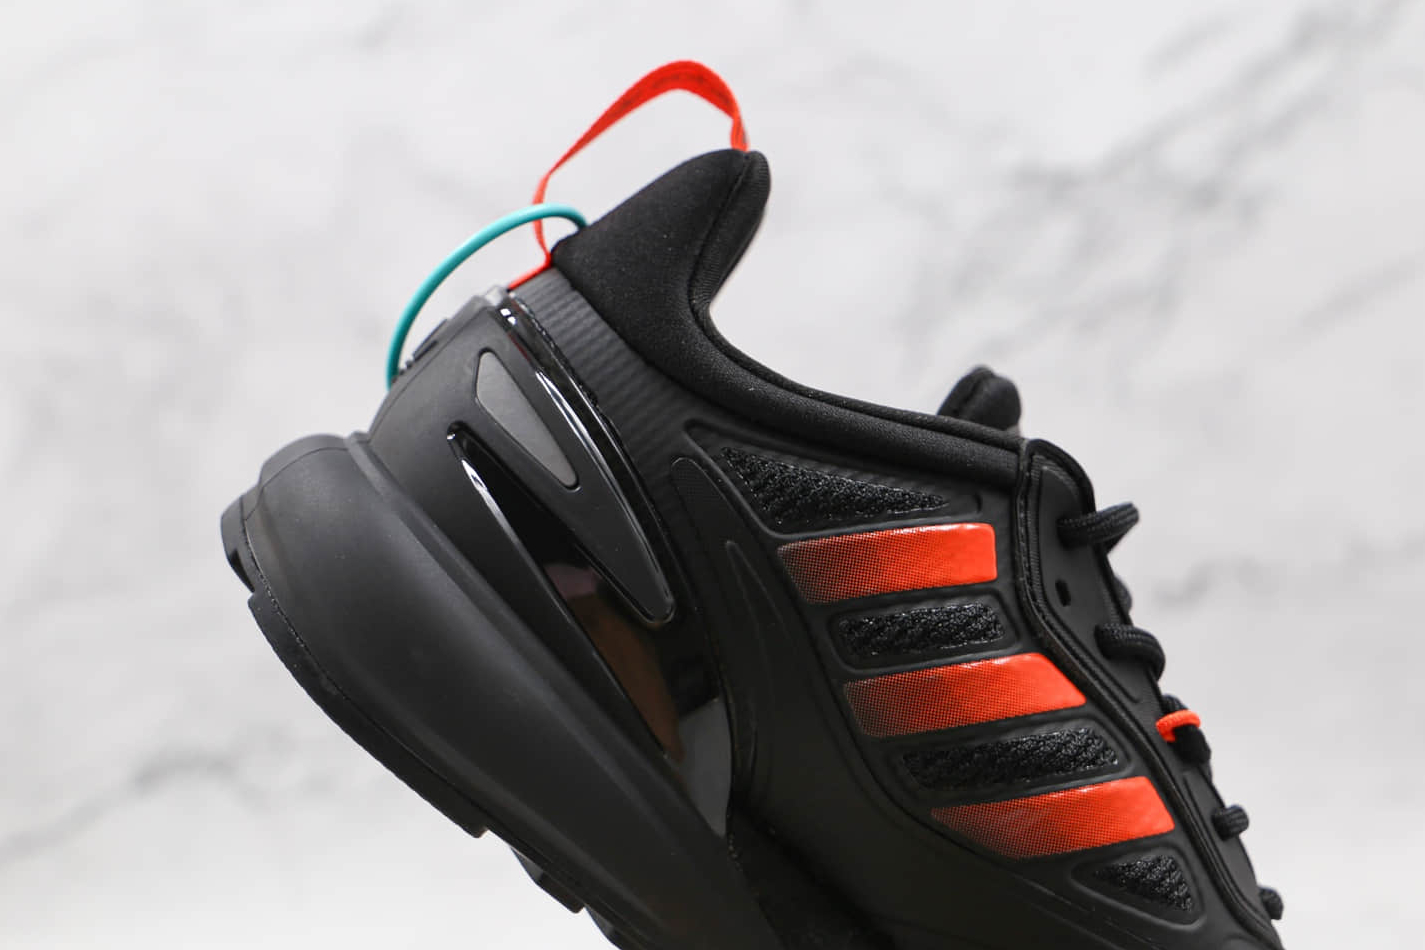 Adidas ZX 2K Boost 2.0 Black Solar Red: Shop the Latest Adidas Sneakers